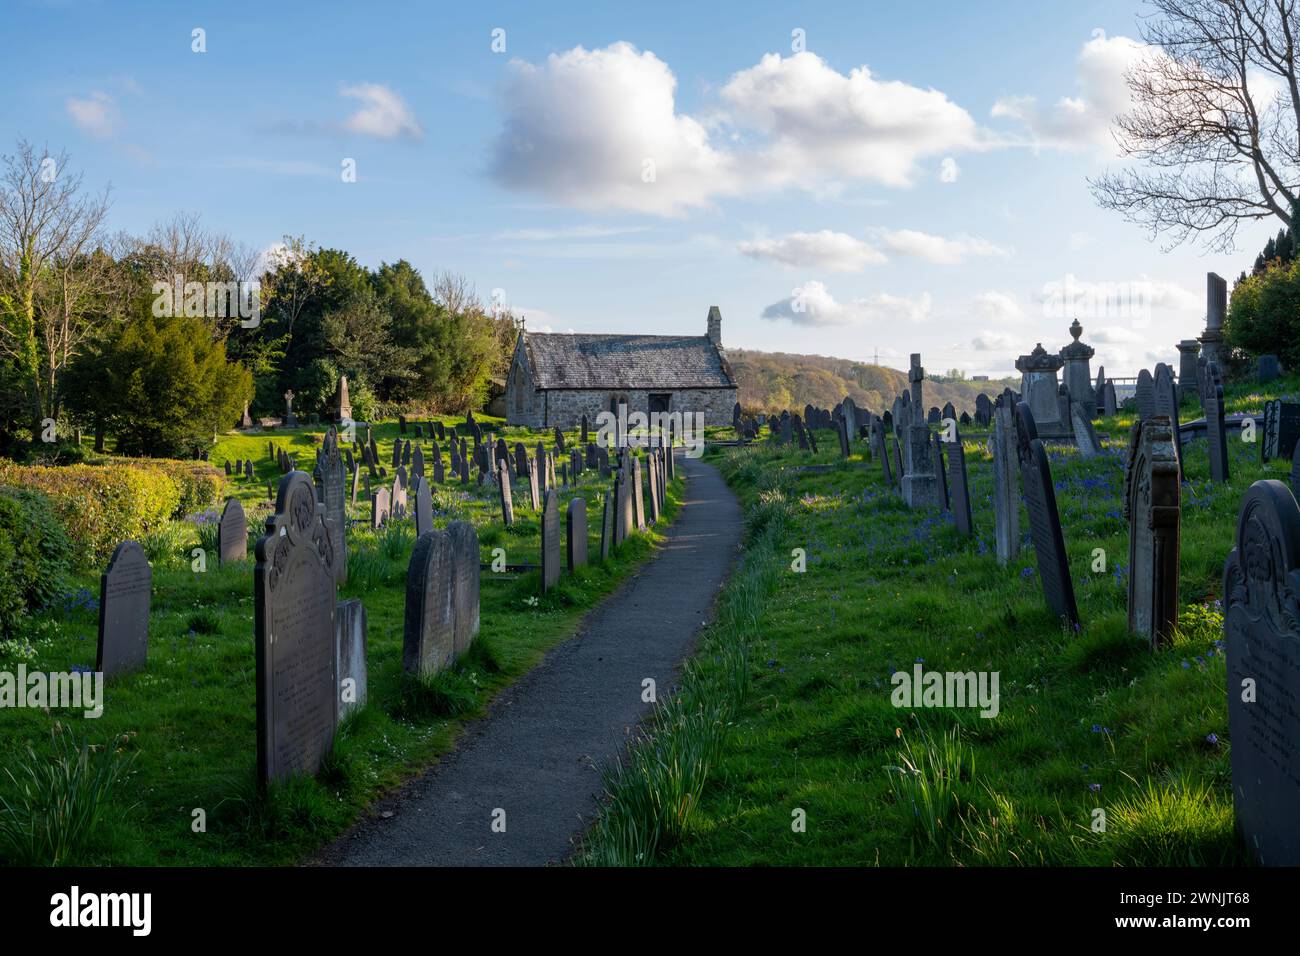 St Tysilio's Church and graveyard on Church Island beside the Menai Strait, Anglesey, North Wales. Stock Photo